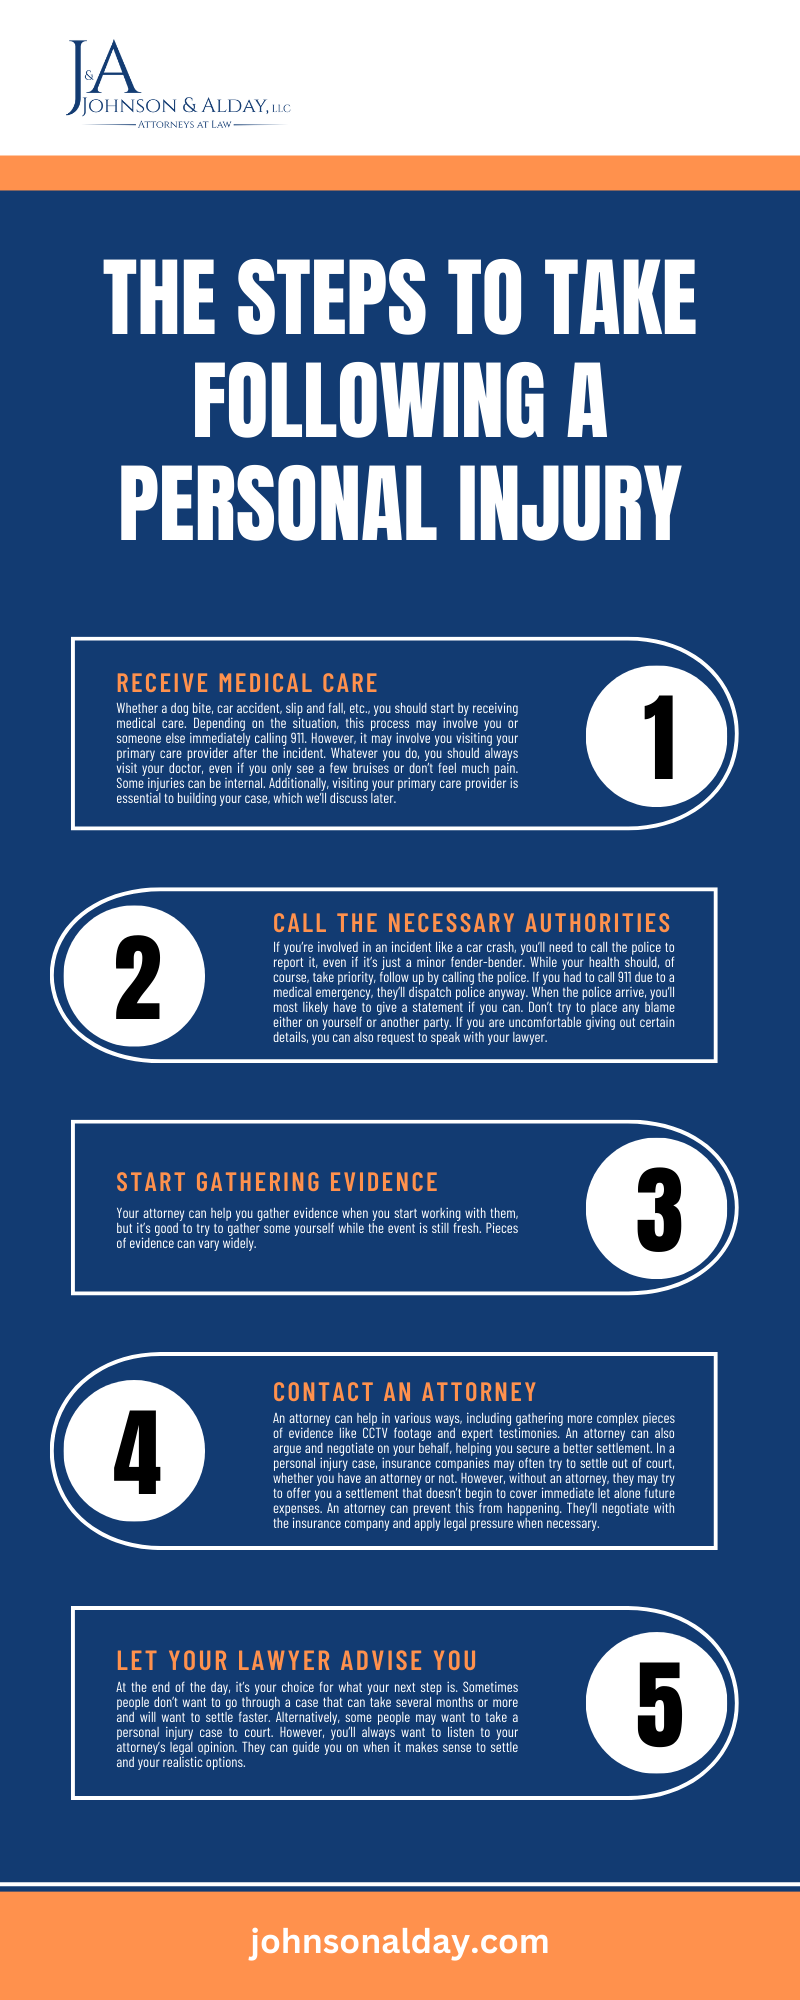 THE STEPS TO TAKE FOLLOWING A PERSONAL INJURY INFOGRAPHIC